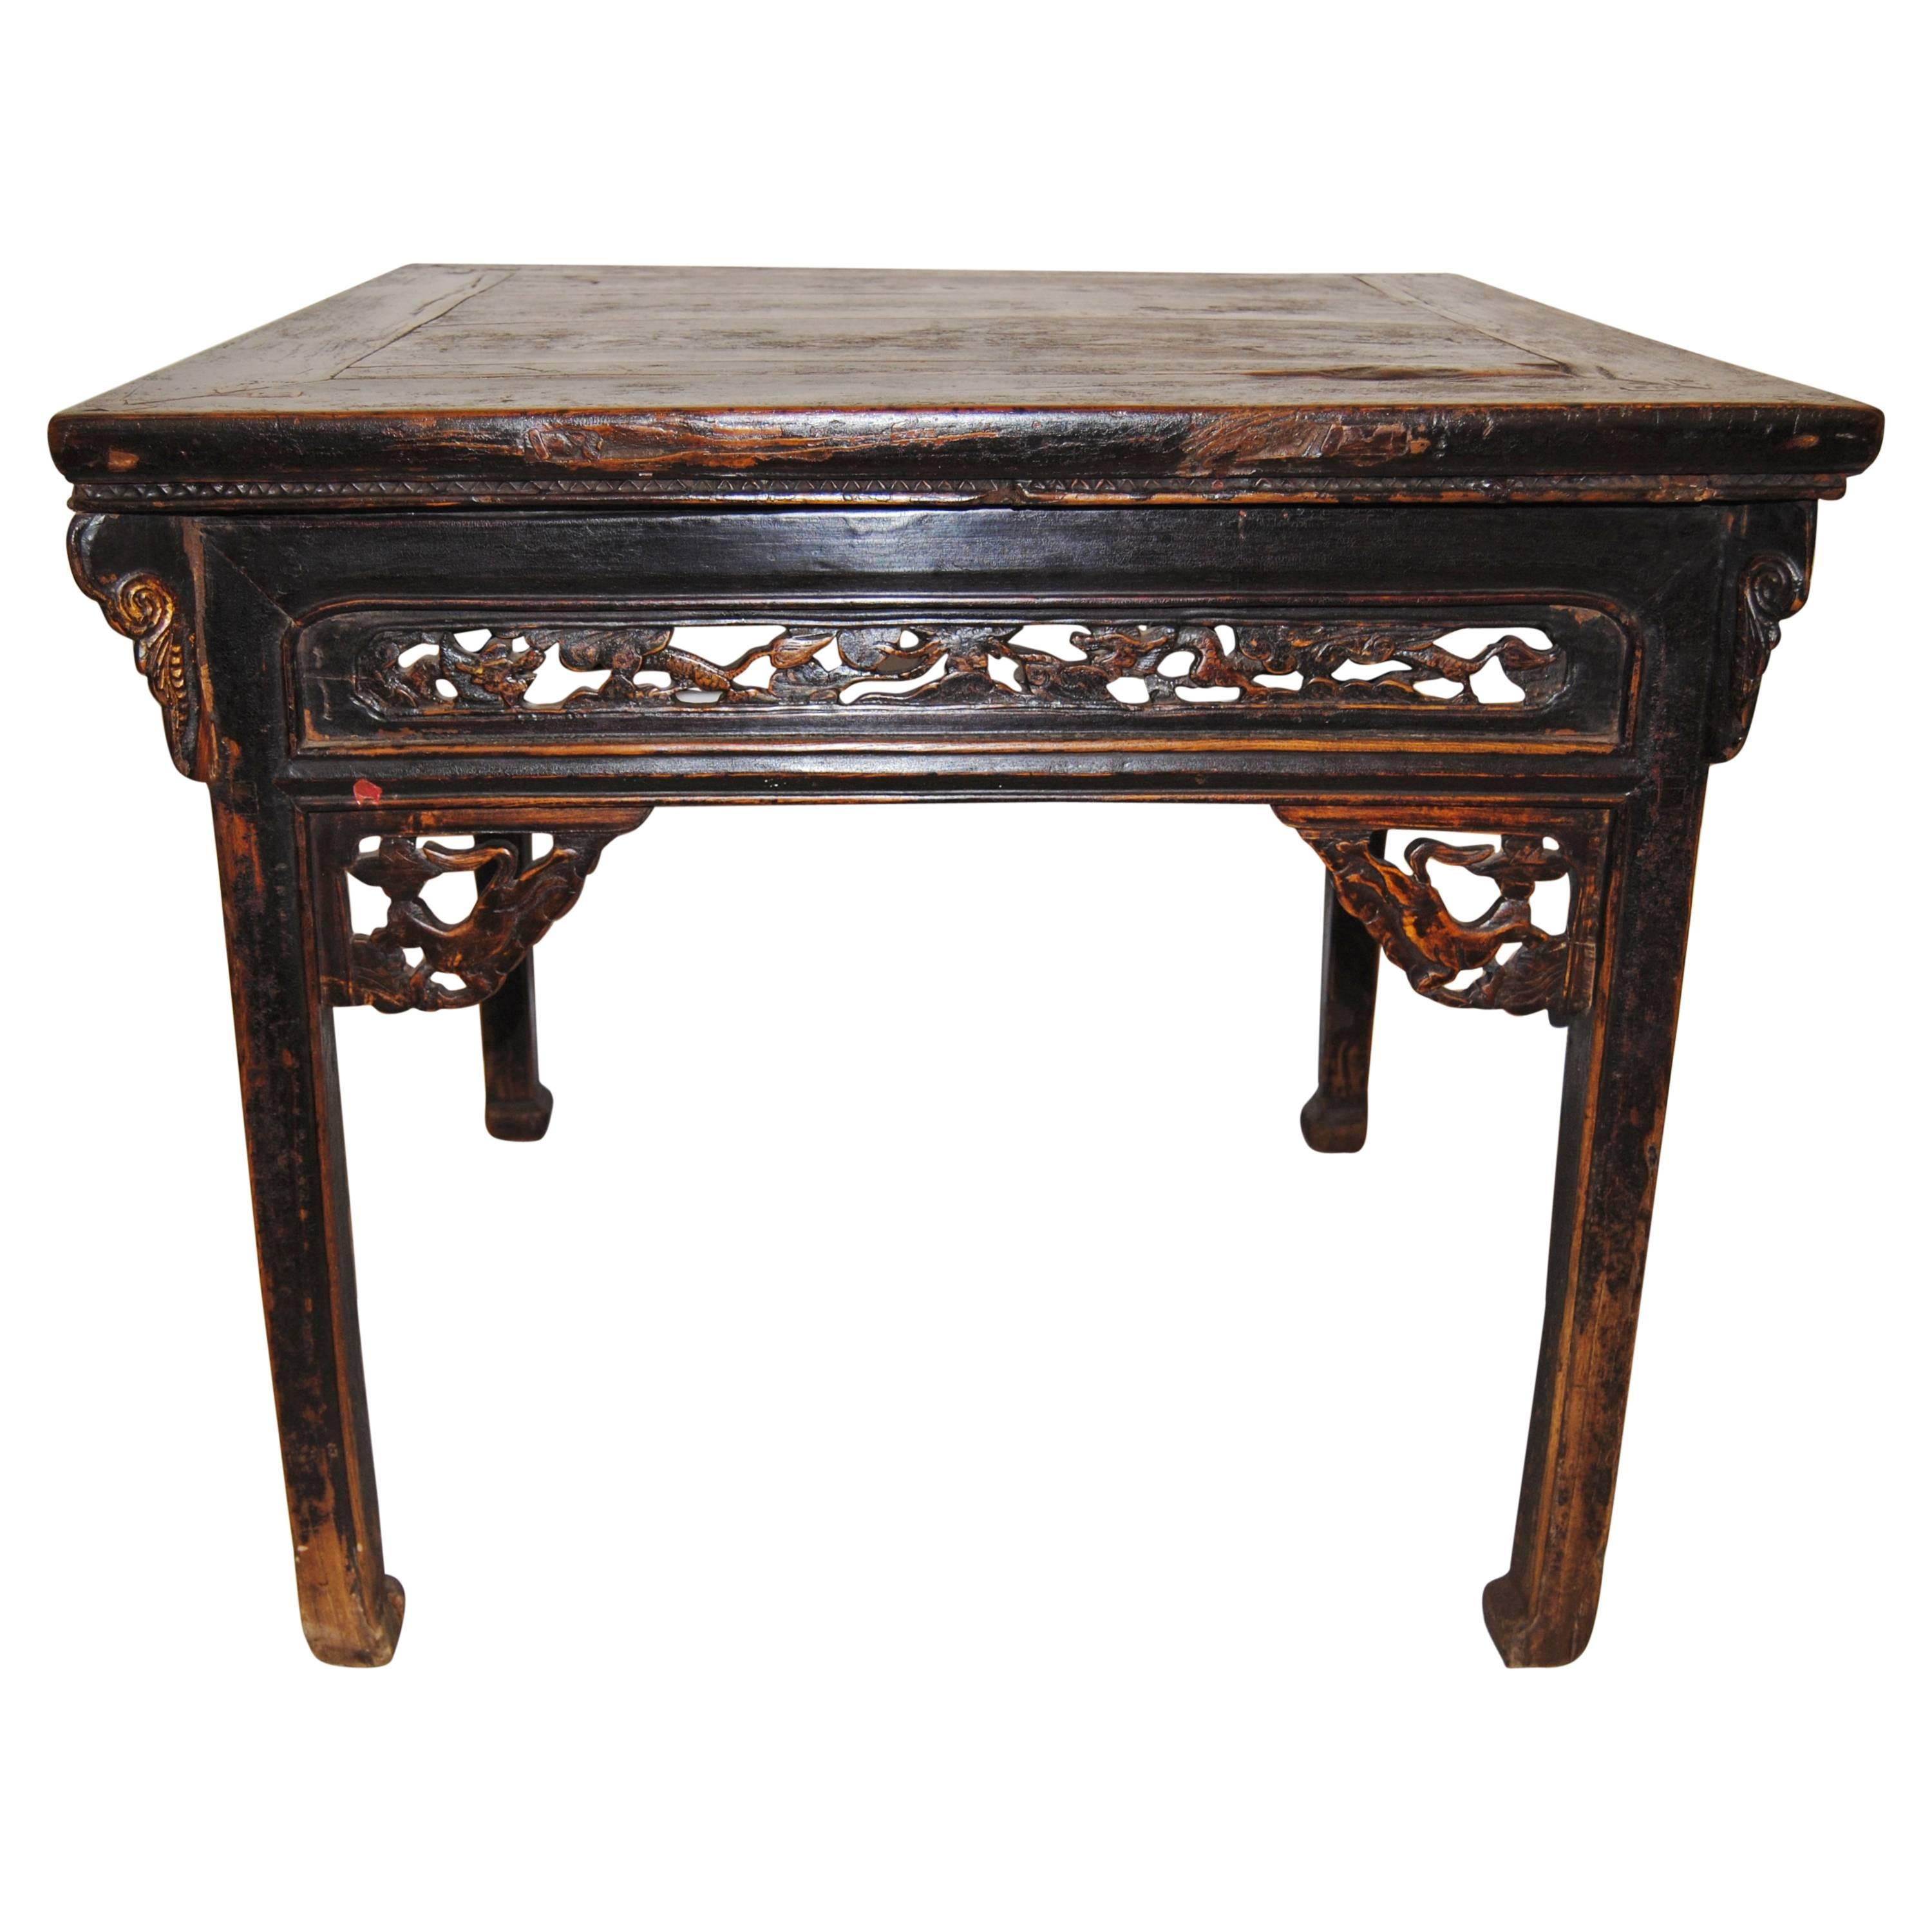 Antique Chinese Eight Horse Square Elmwood Table, Mid-19th Century For Sale